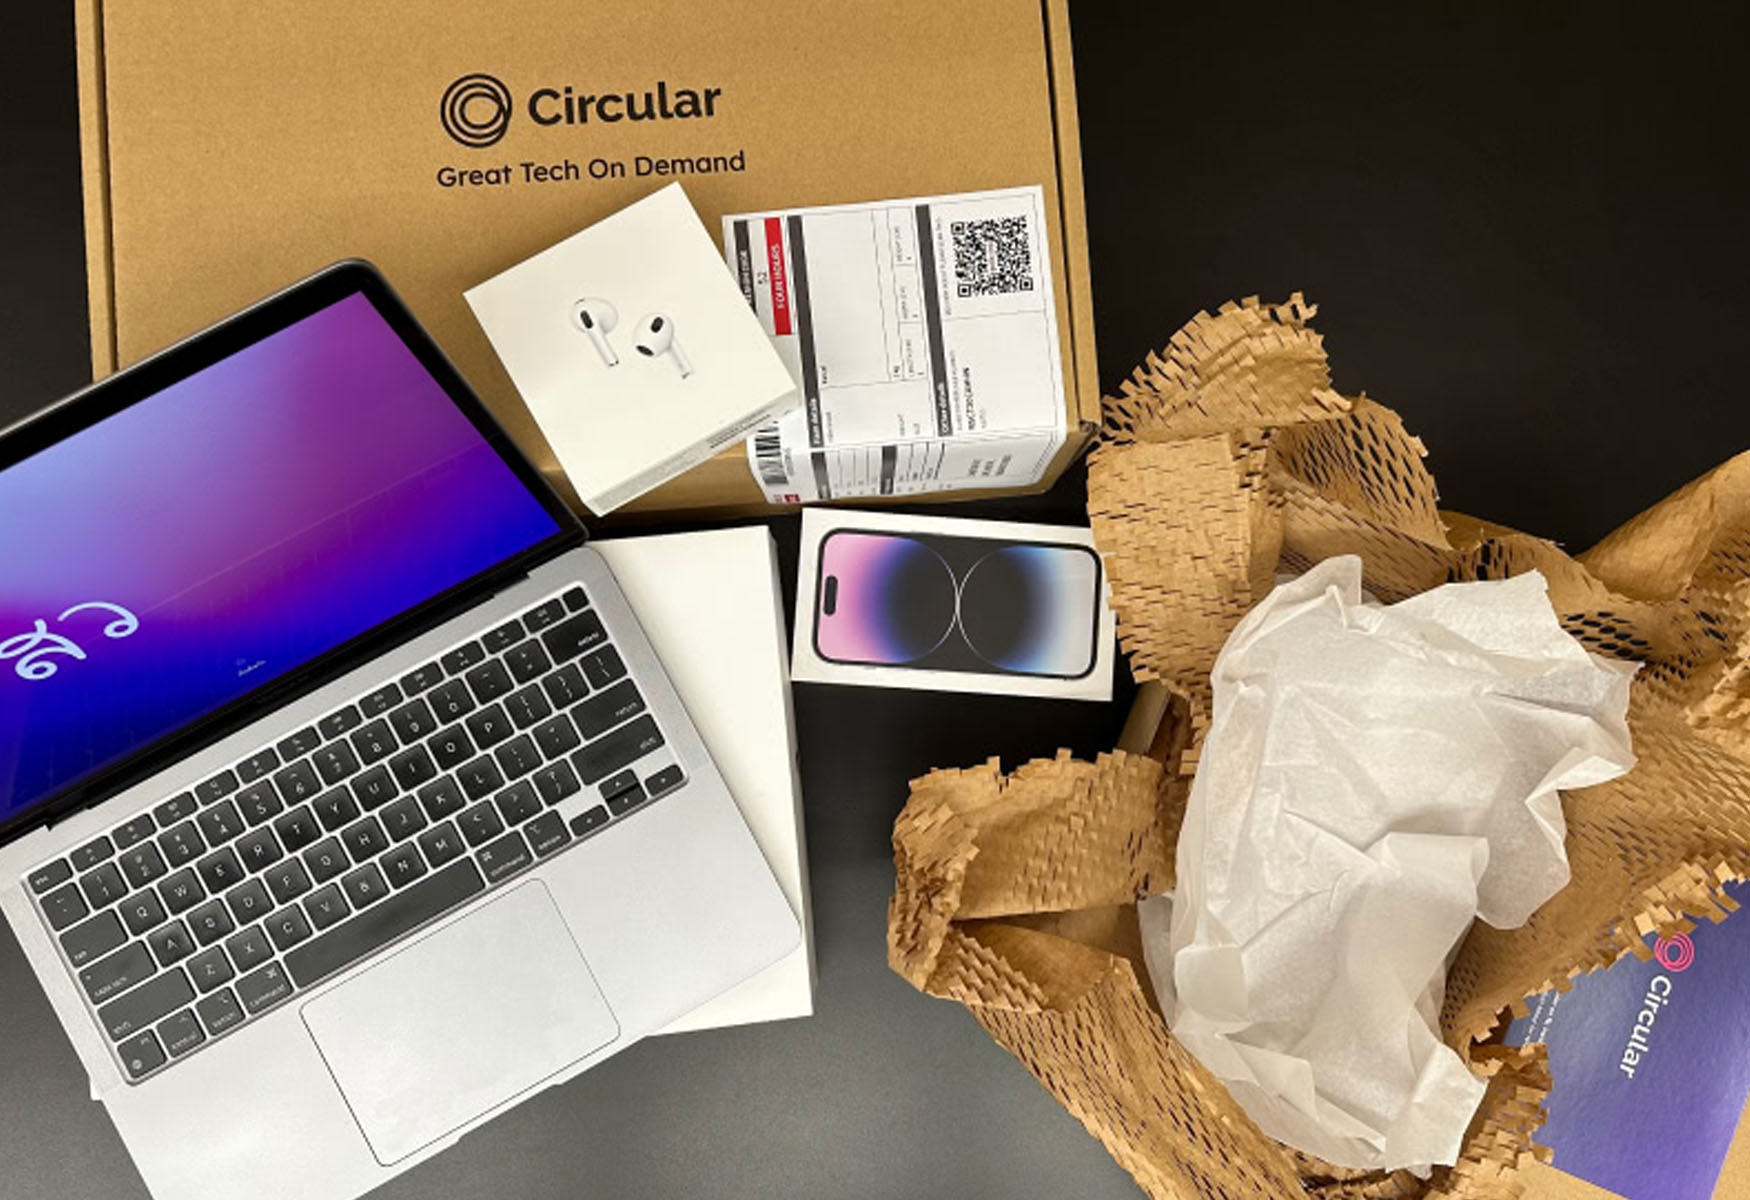 Circular: Subscription Service Keeping Devices Out Of Landfill